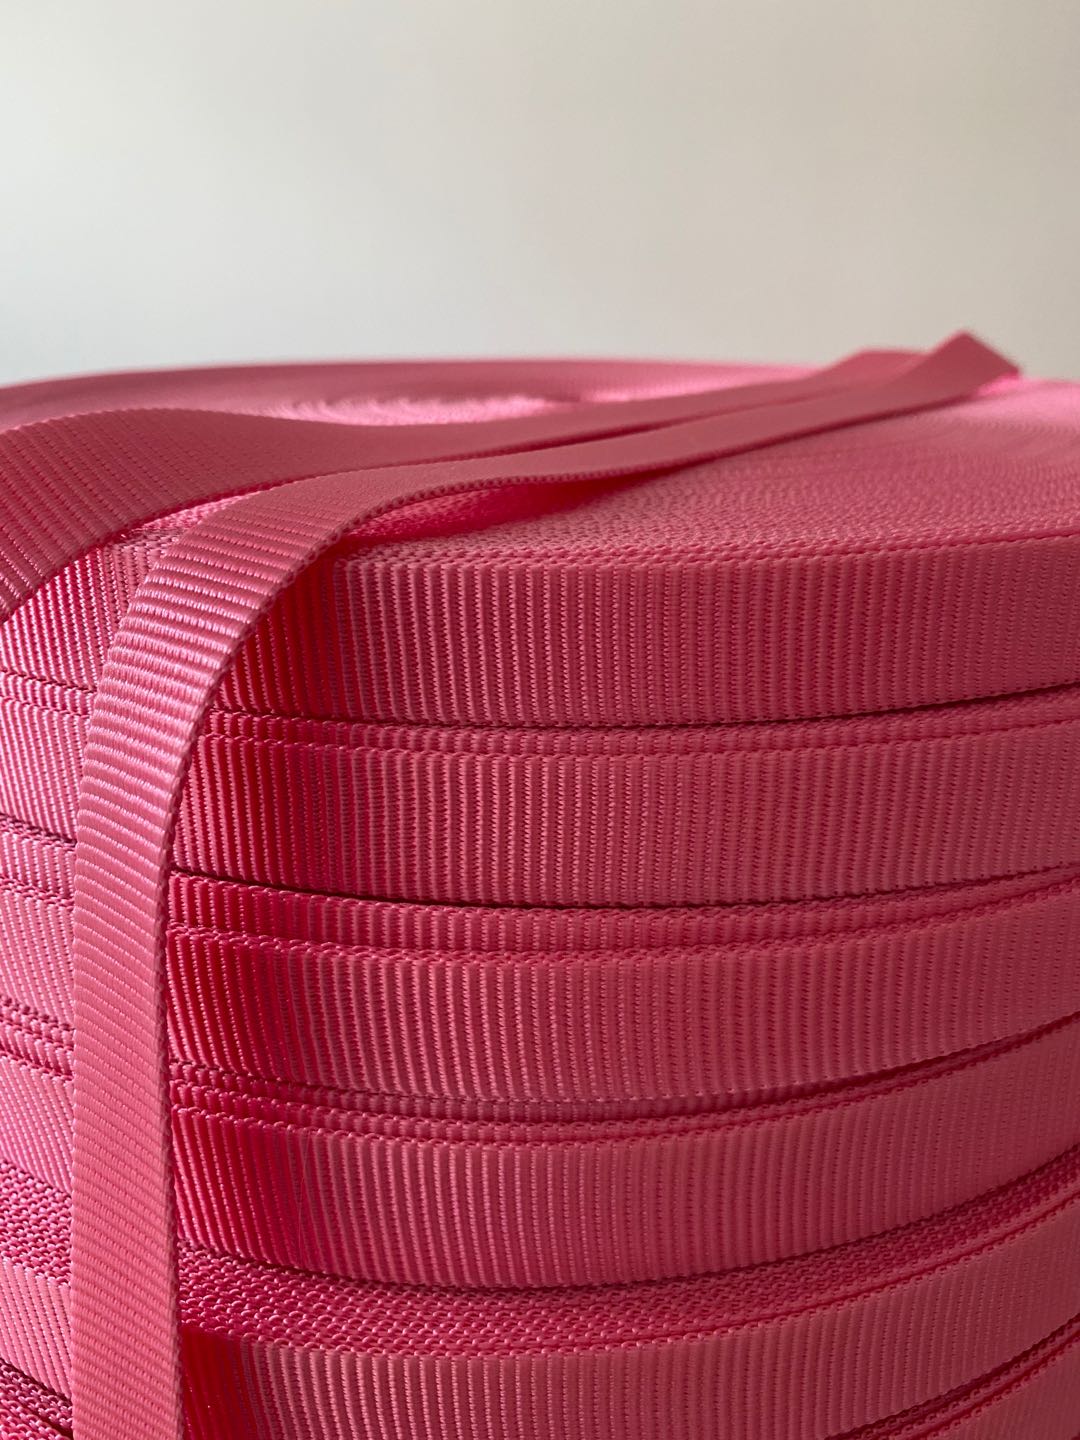 5-20 yards Pink Nylon Webbing for Dog Collar and more